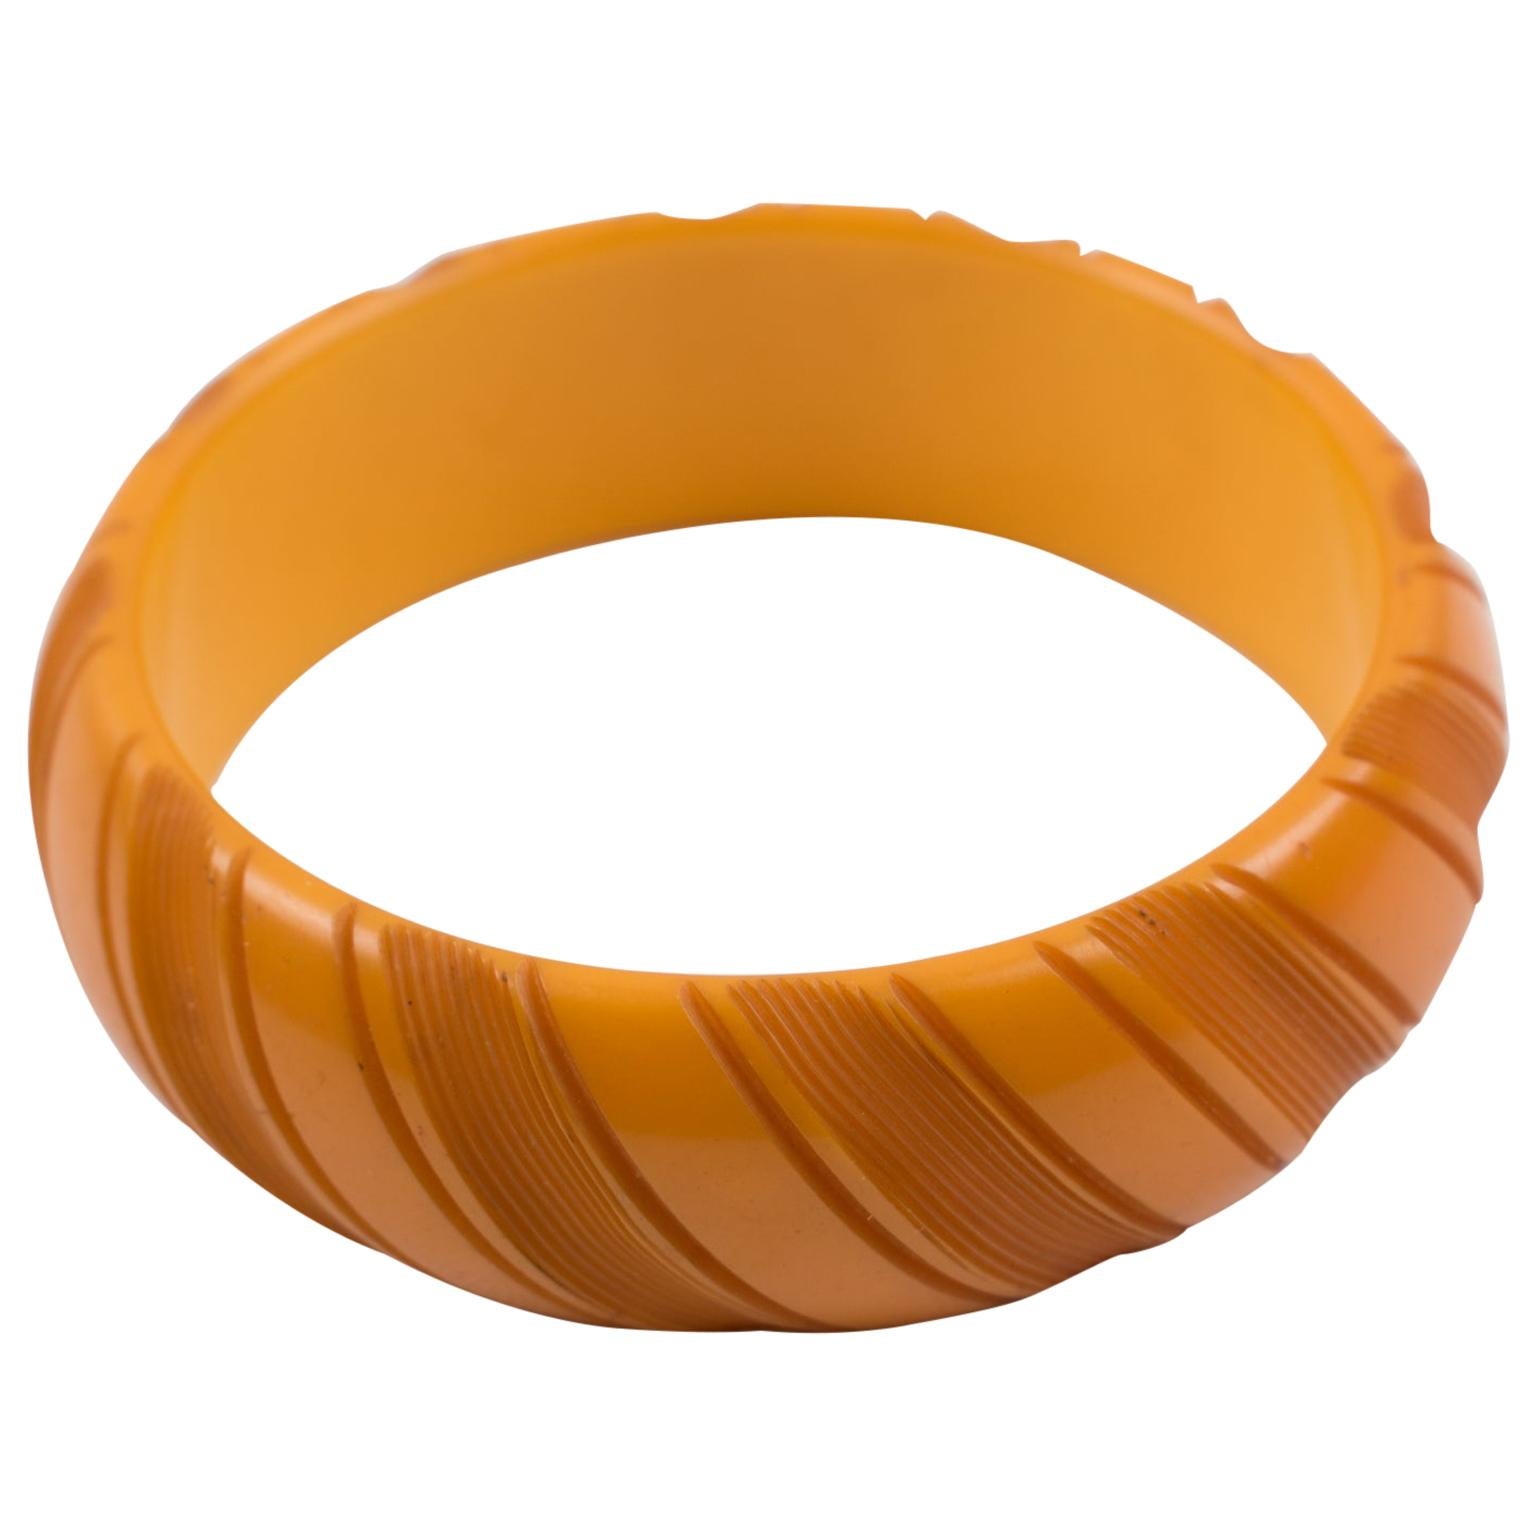 This adorable butterscotch Bakelite bracelet bangle boasts a chunky domed shape with deep geometric carving and an intense butterscotch yellow/orange color. 
Measurements: Inside across is 2.63 in diameter (6.6 cm) - outside across is 3.19 in